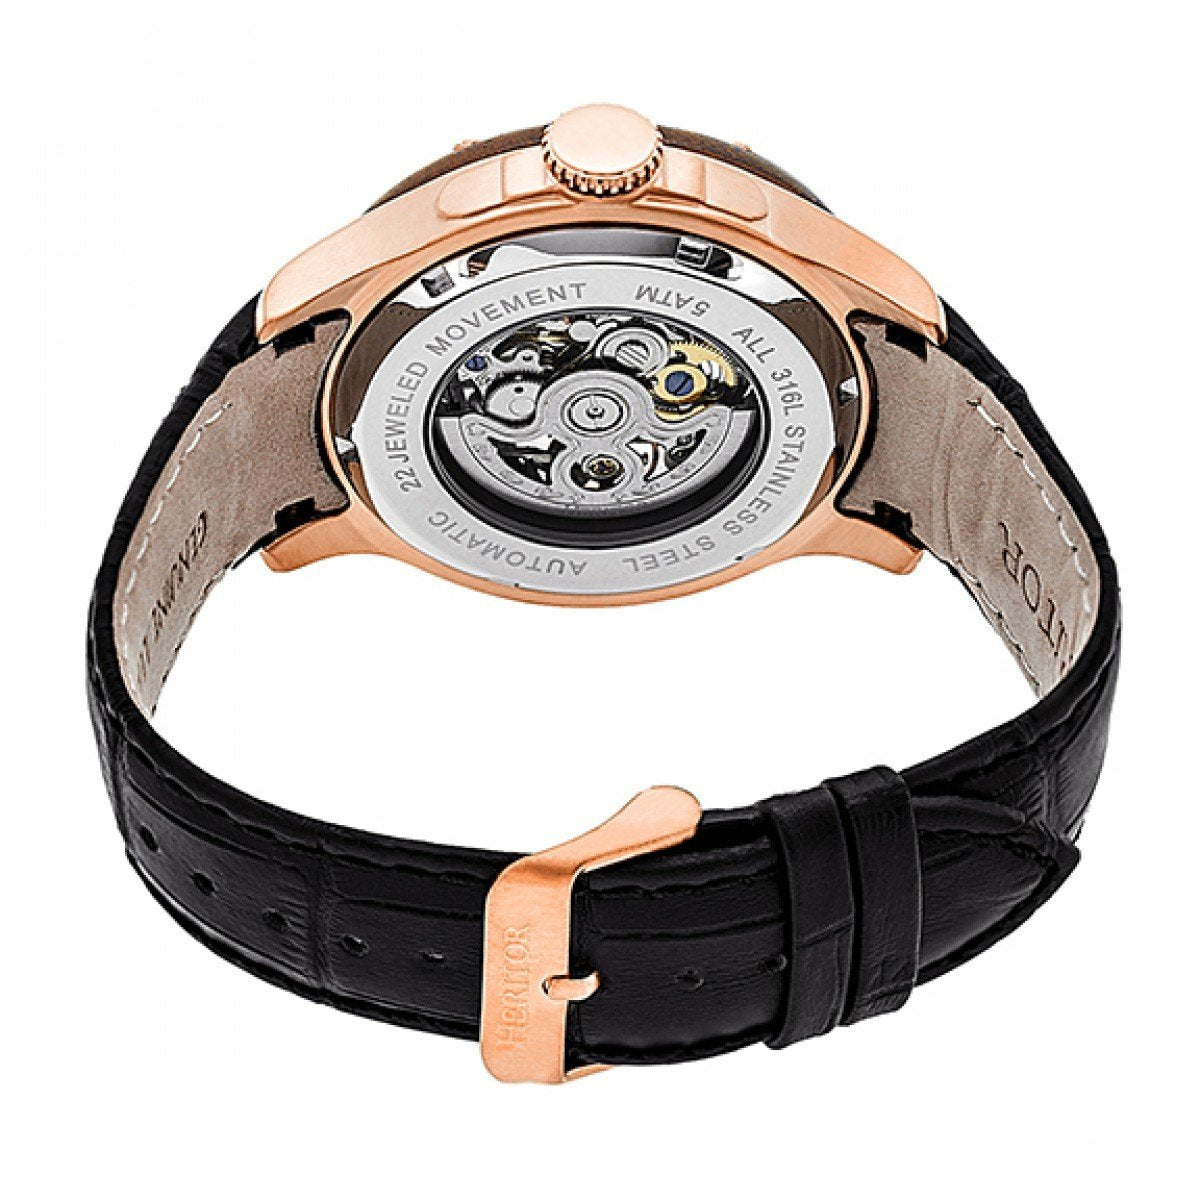 Heritor Automatic Belmont Skeleton Leather-Band Watch - Rose Gold/Silver - HERHR3905